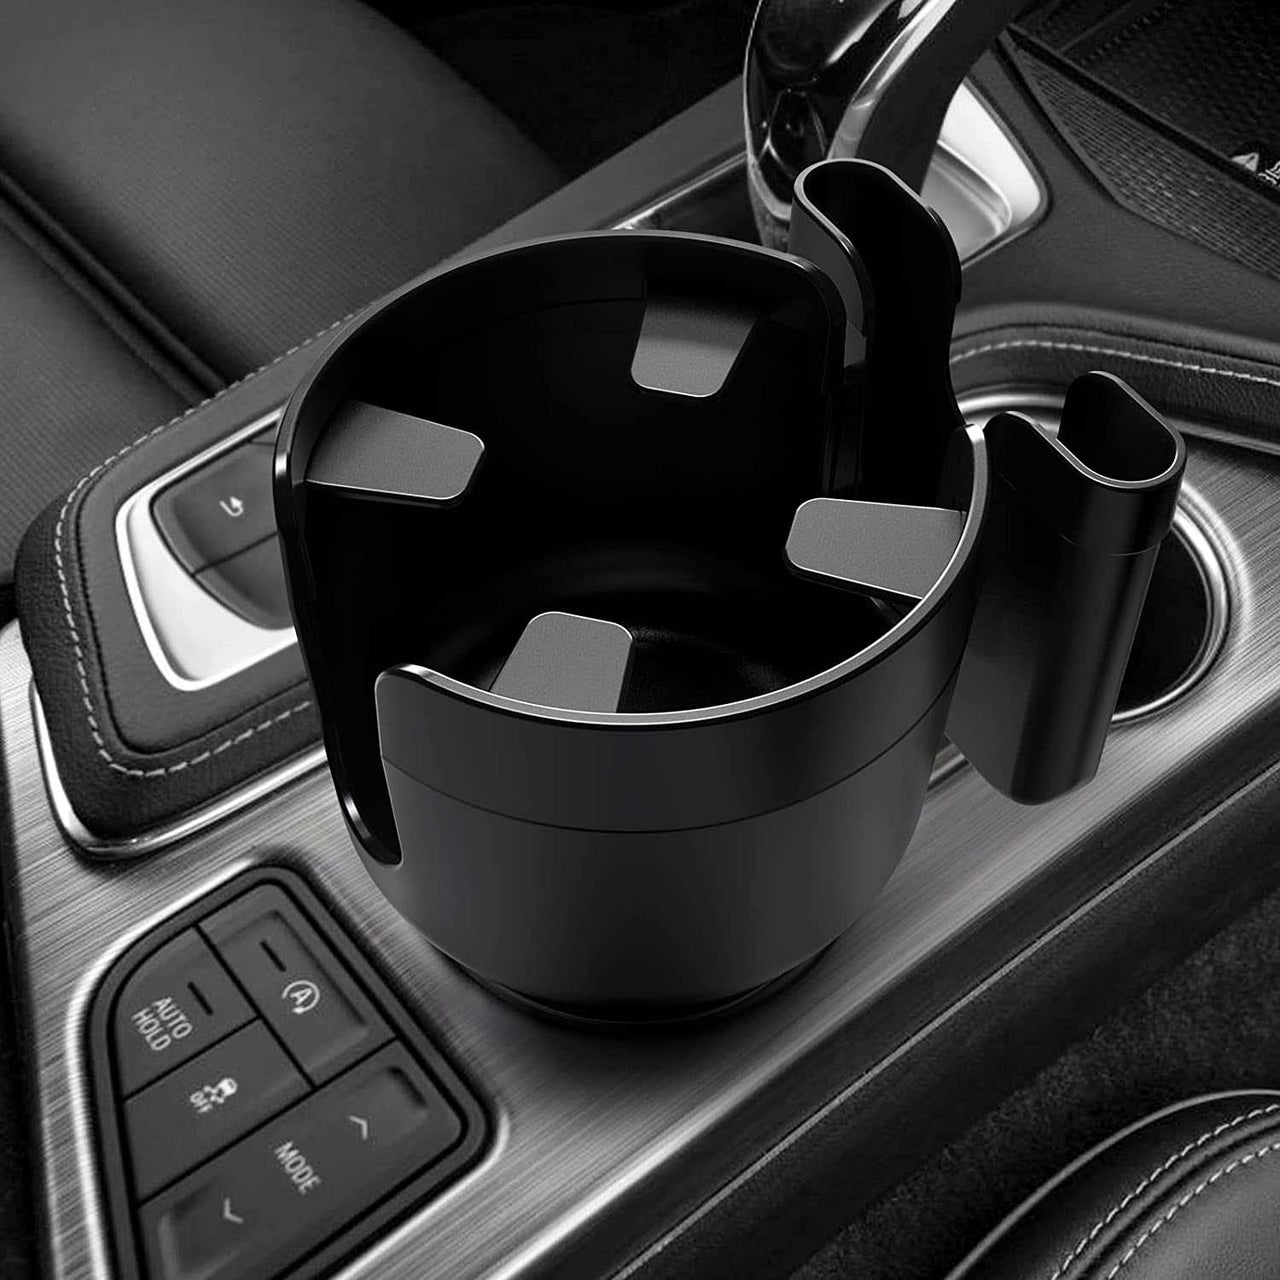 2-in-1 Car Cup Holder Expander Adapter with Adjustable Base, Custom Fit For Your Cars, Car Cup Holder Expander Organizer with Phone Holder, Fits 32/40 oz Drinks Bottles, Car Accessories MS15988